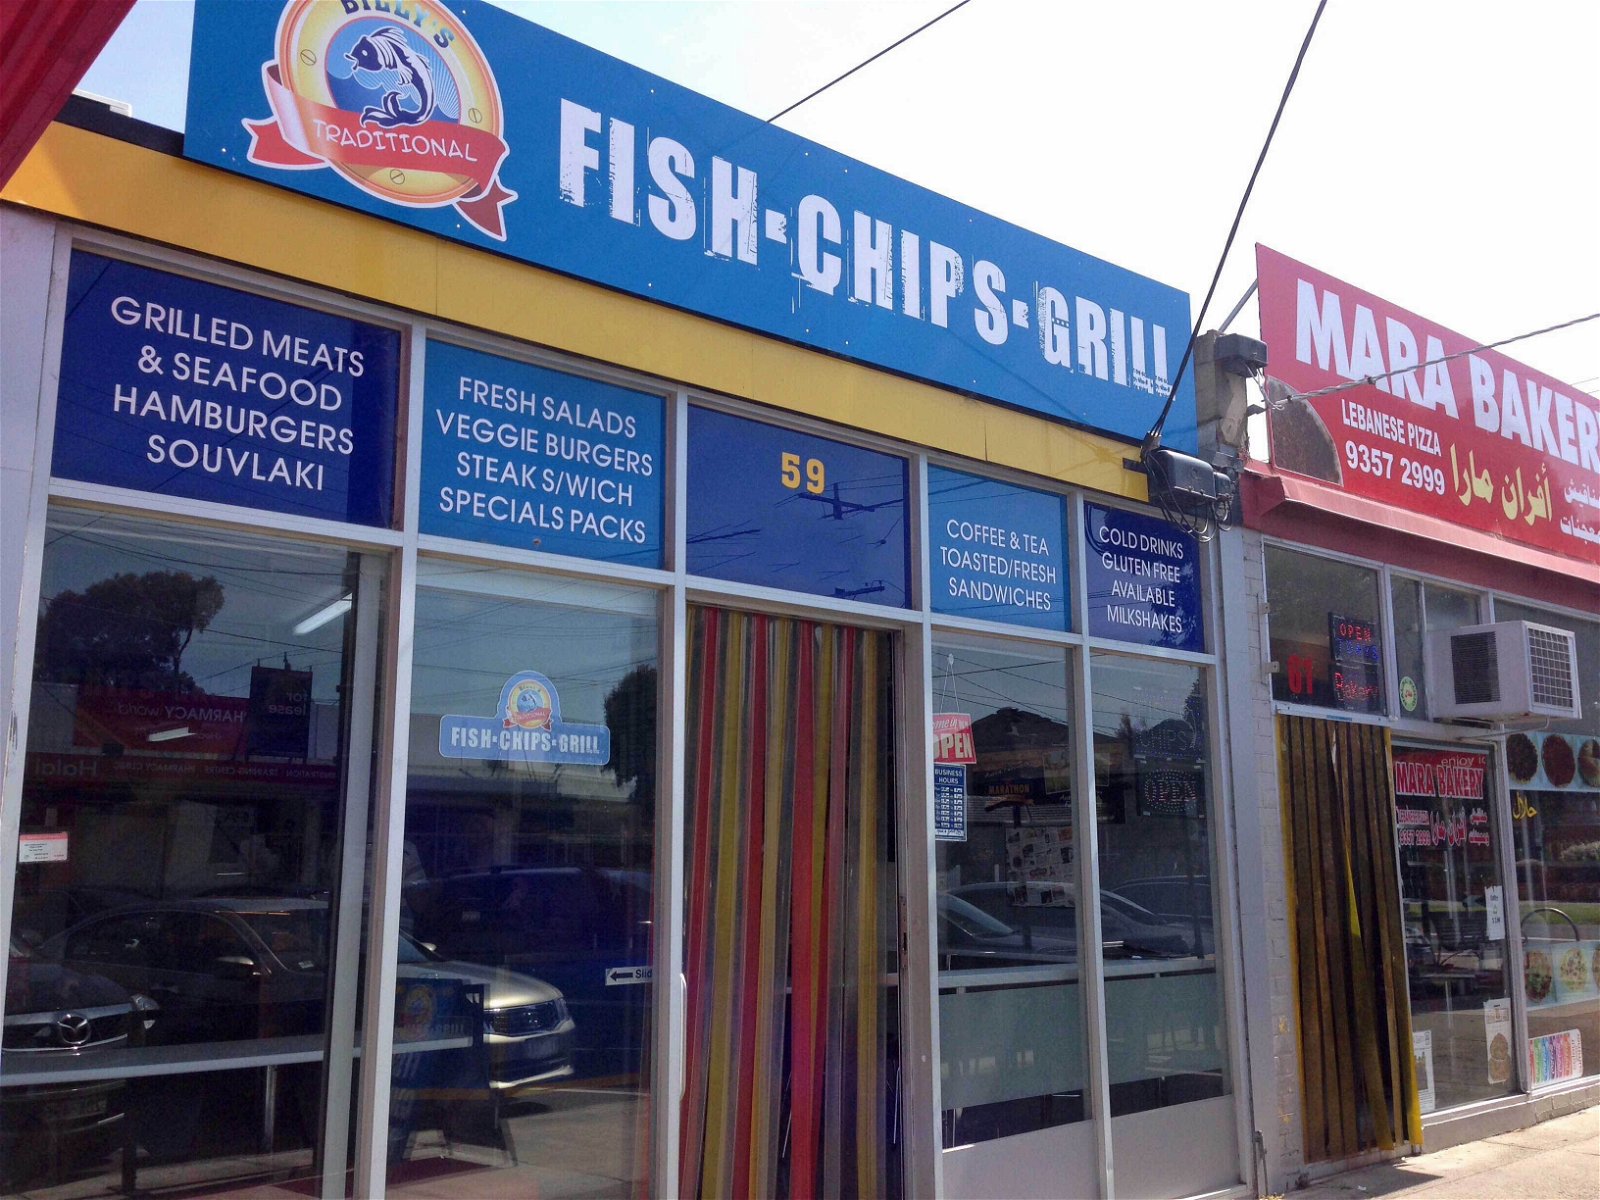 Billy's Traditional Fish Chips Grill - Pubs Sydney